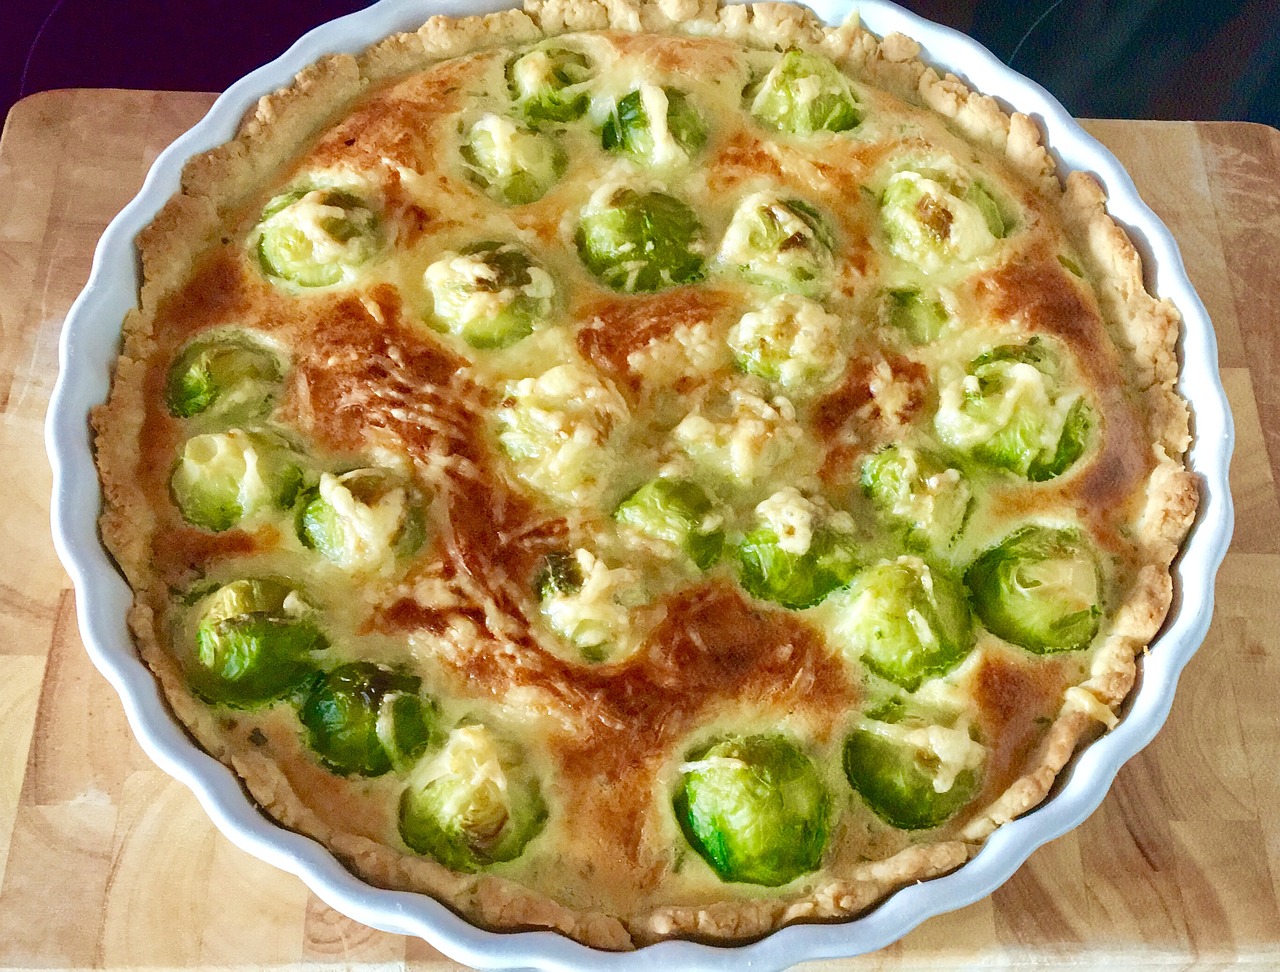 brussels sprouts casserole shortcrust pastry free photo